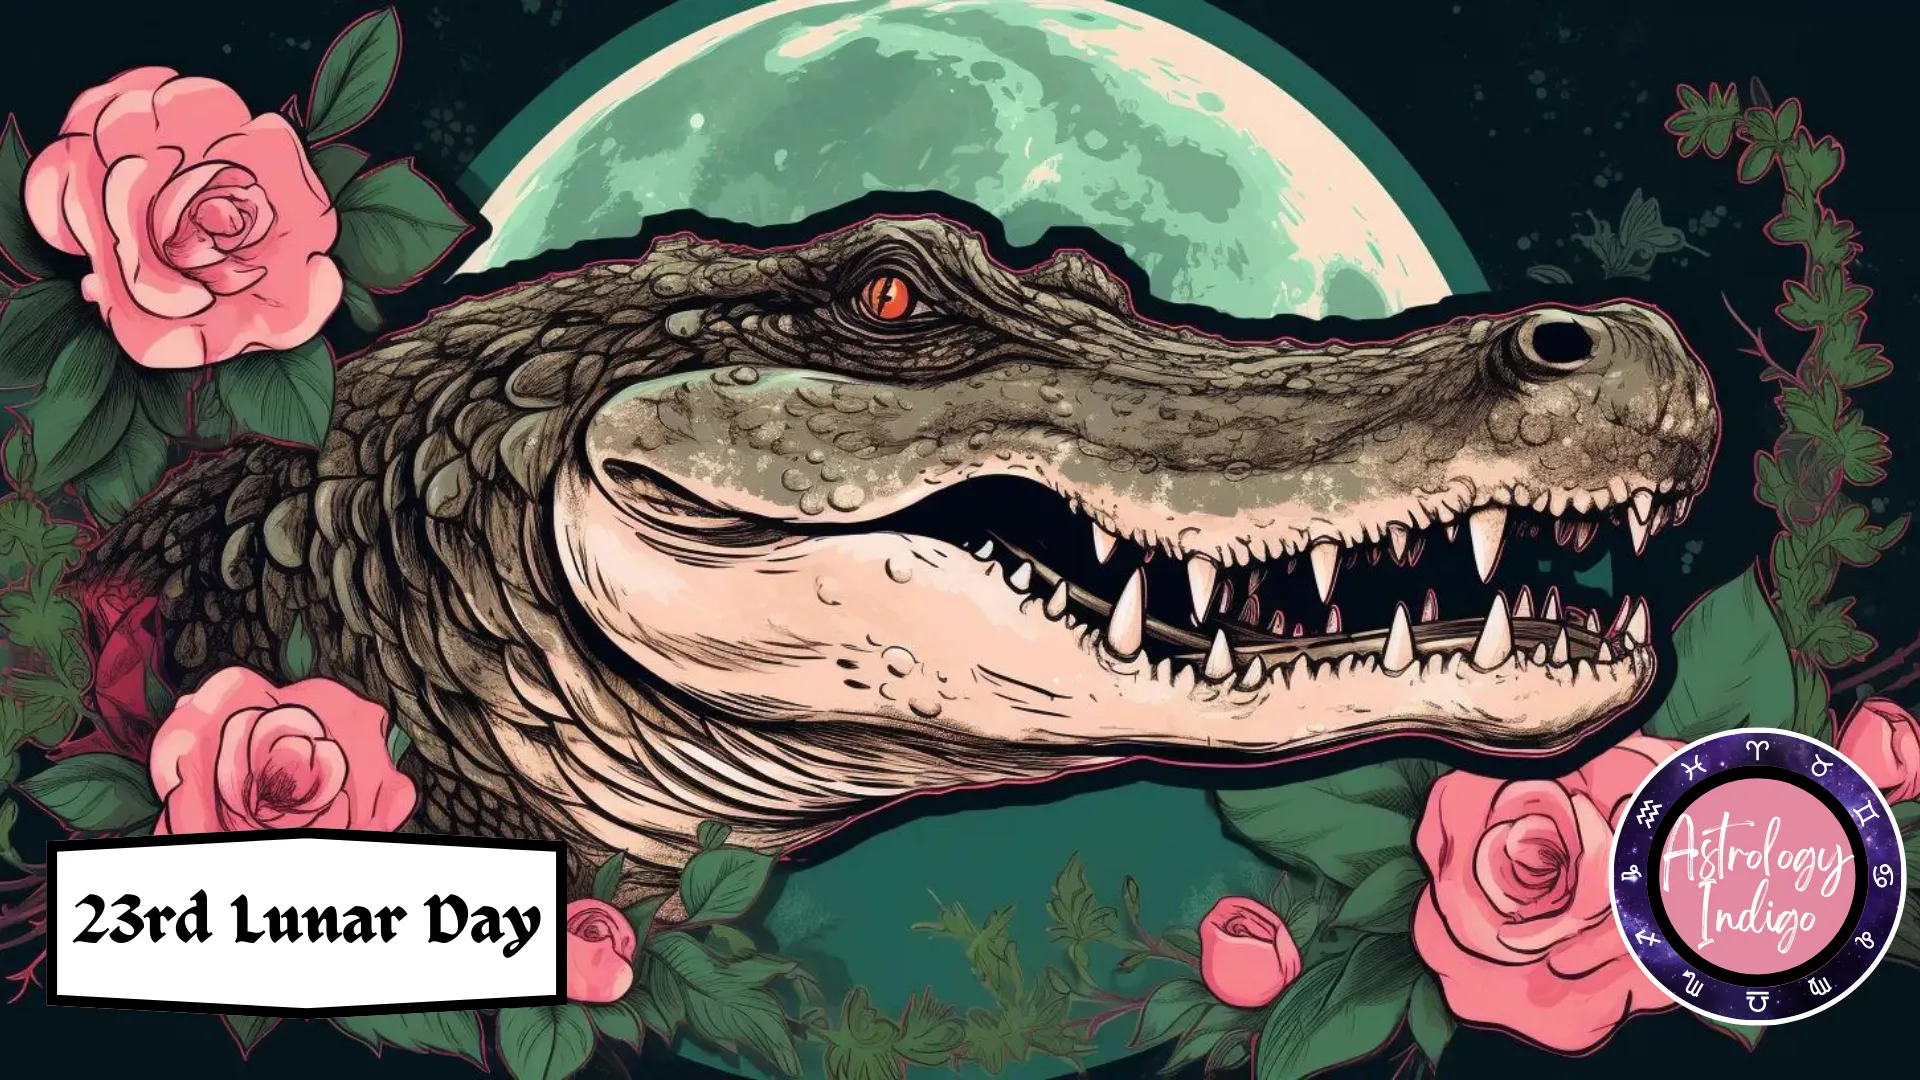 A crocodile's head peaks out from some flowers in front of the moon very menacingly.